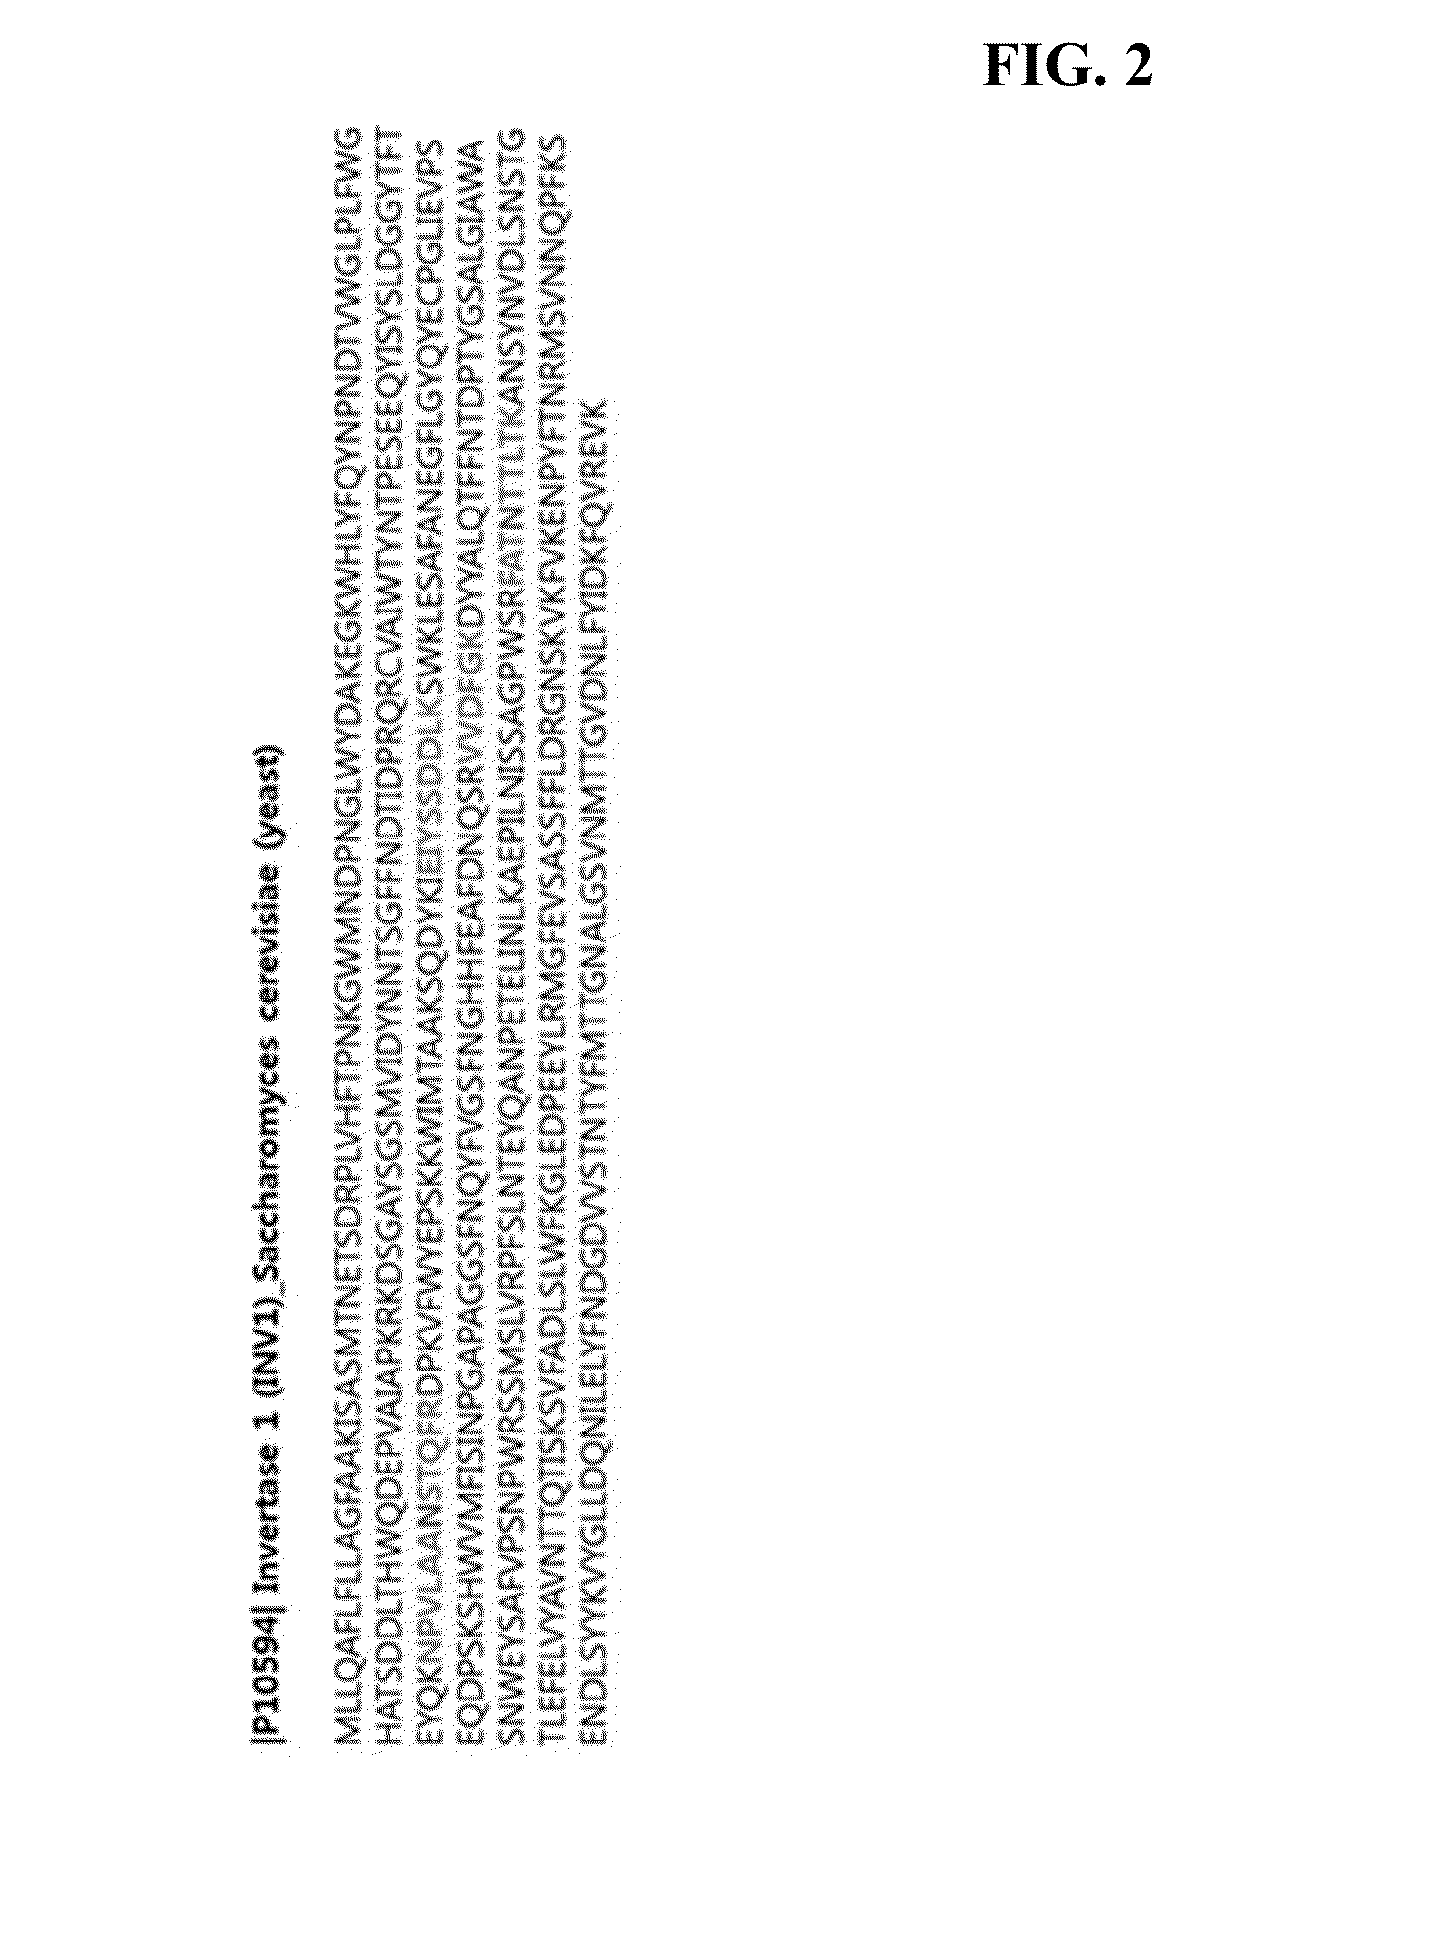 Method for diagnosing cancer through detection of deglycosylation of glycoprotein